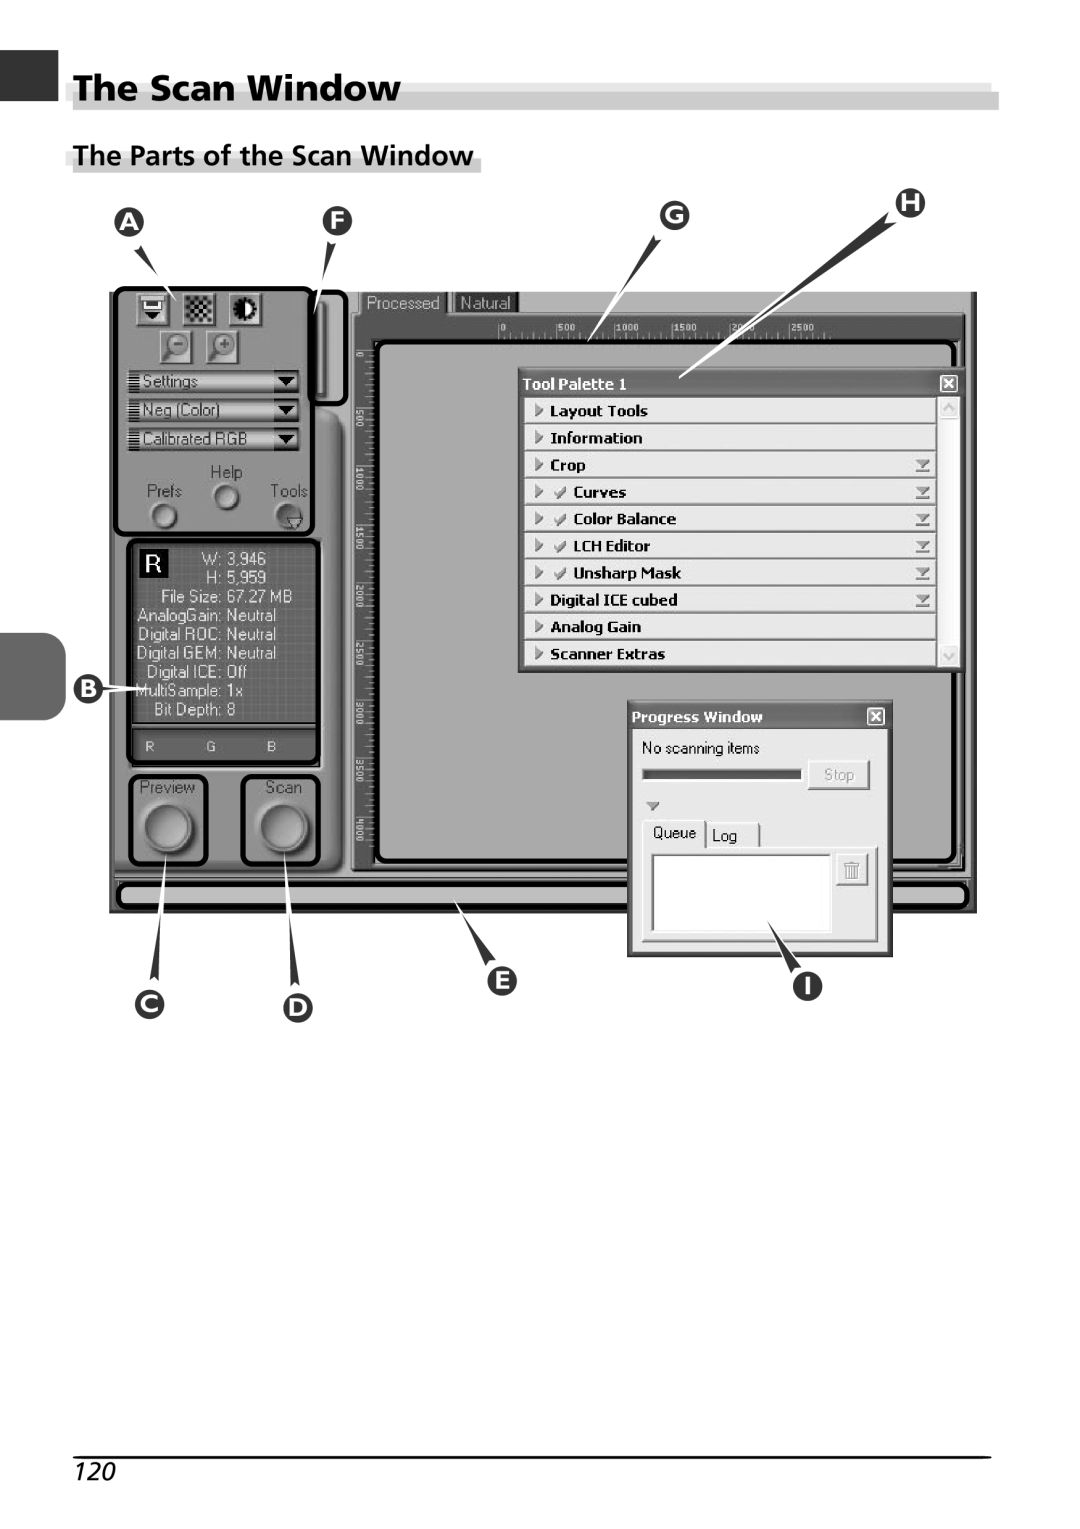 Nikon LS4000 user manual The Scan Window, The Parts of the Scan Window, Afg B, Ei C D 